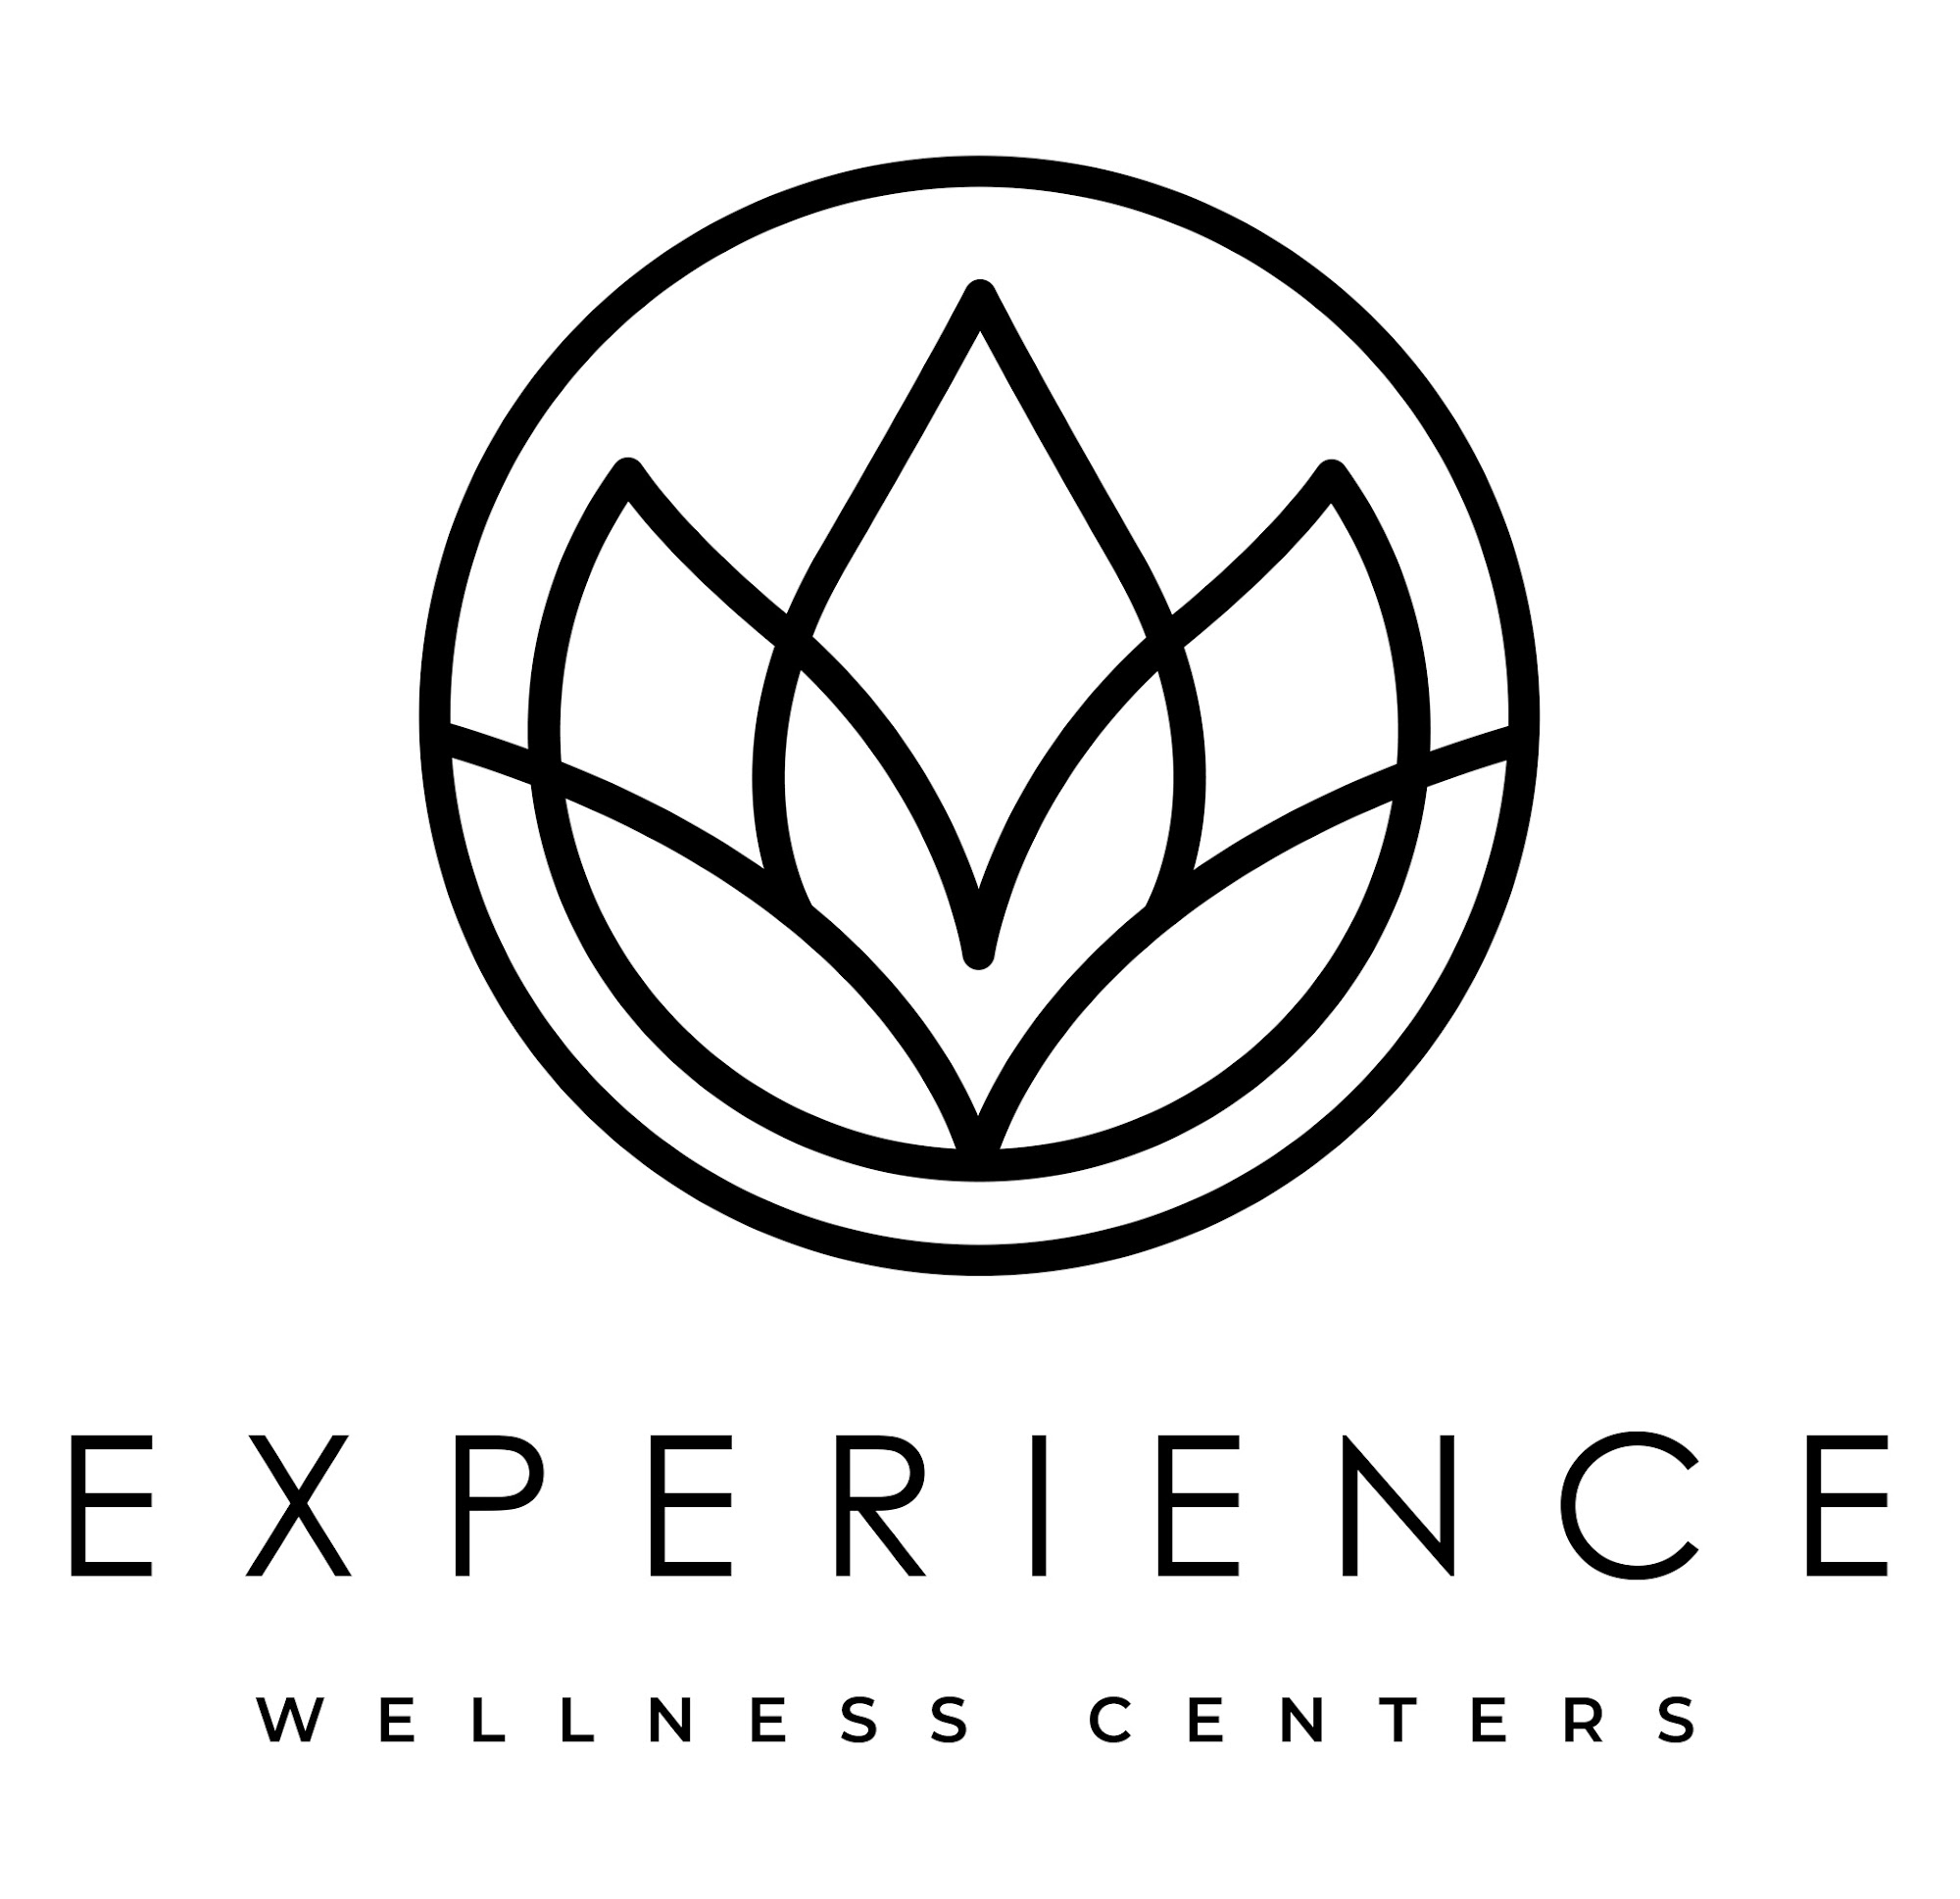 Experience Wellness Centers of Northern IL 175 Olde Half Day Rd Unit 122, Lincolnshire Illinois 60069